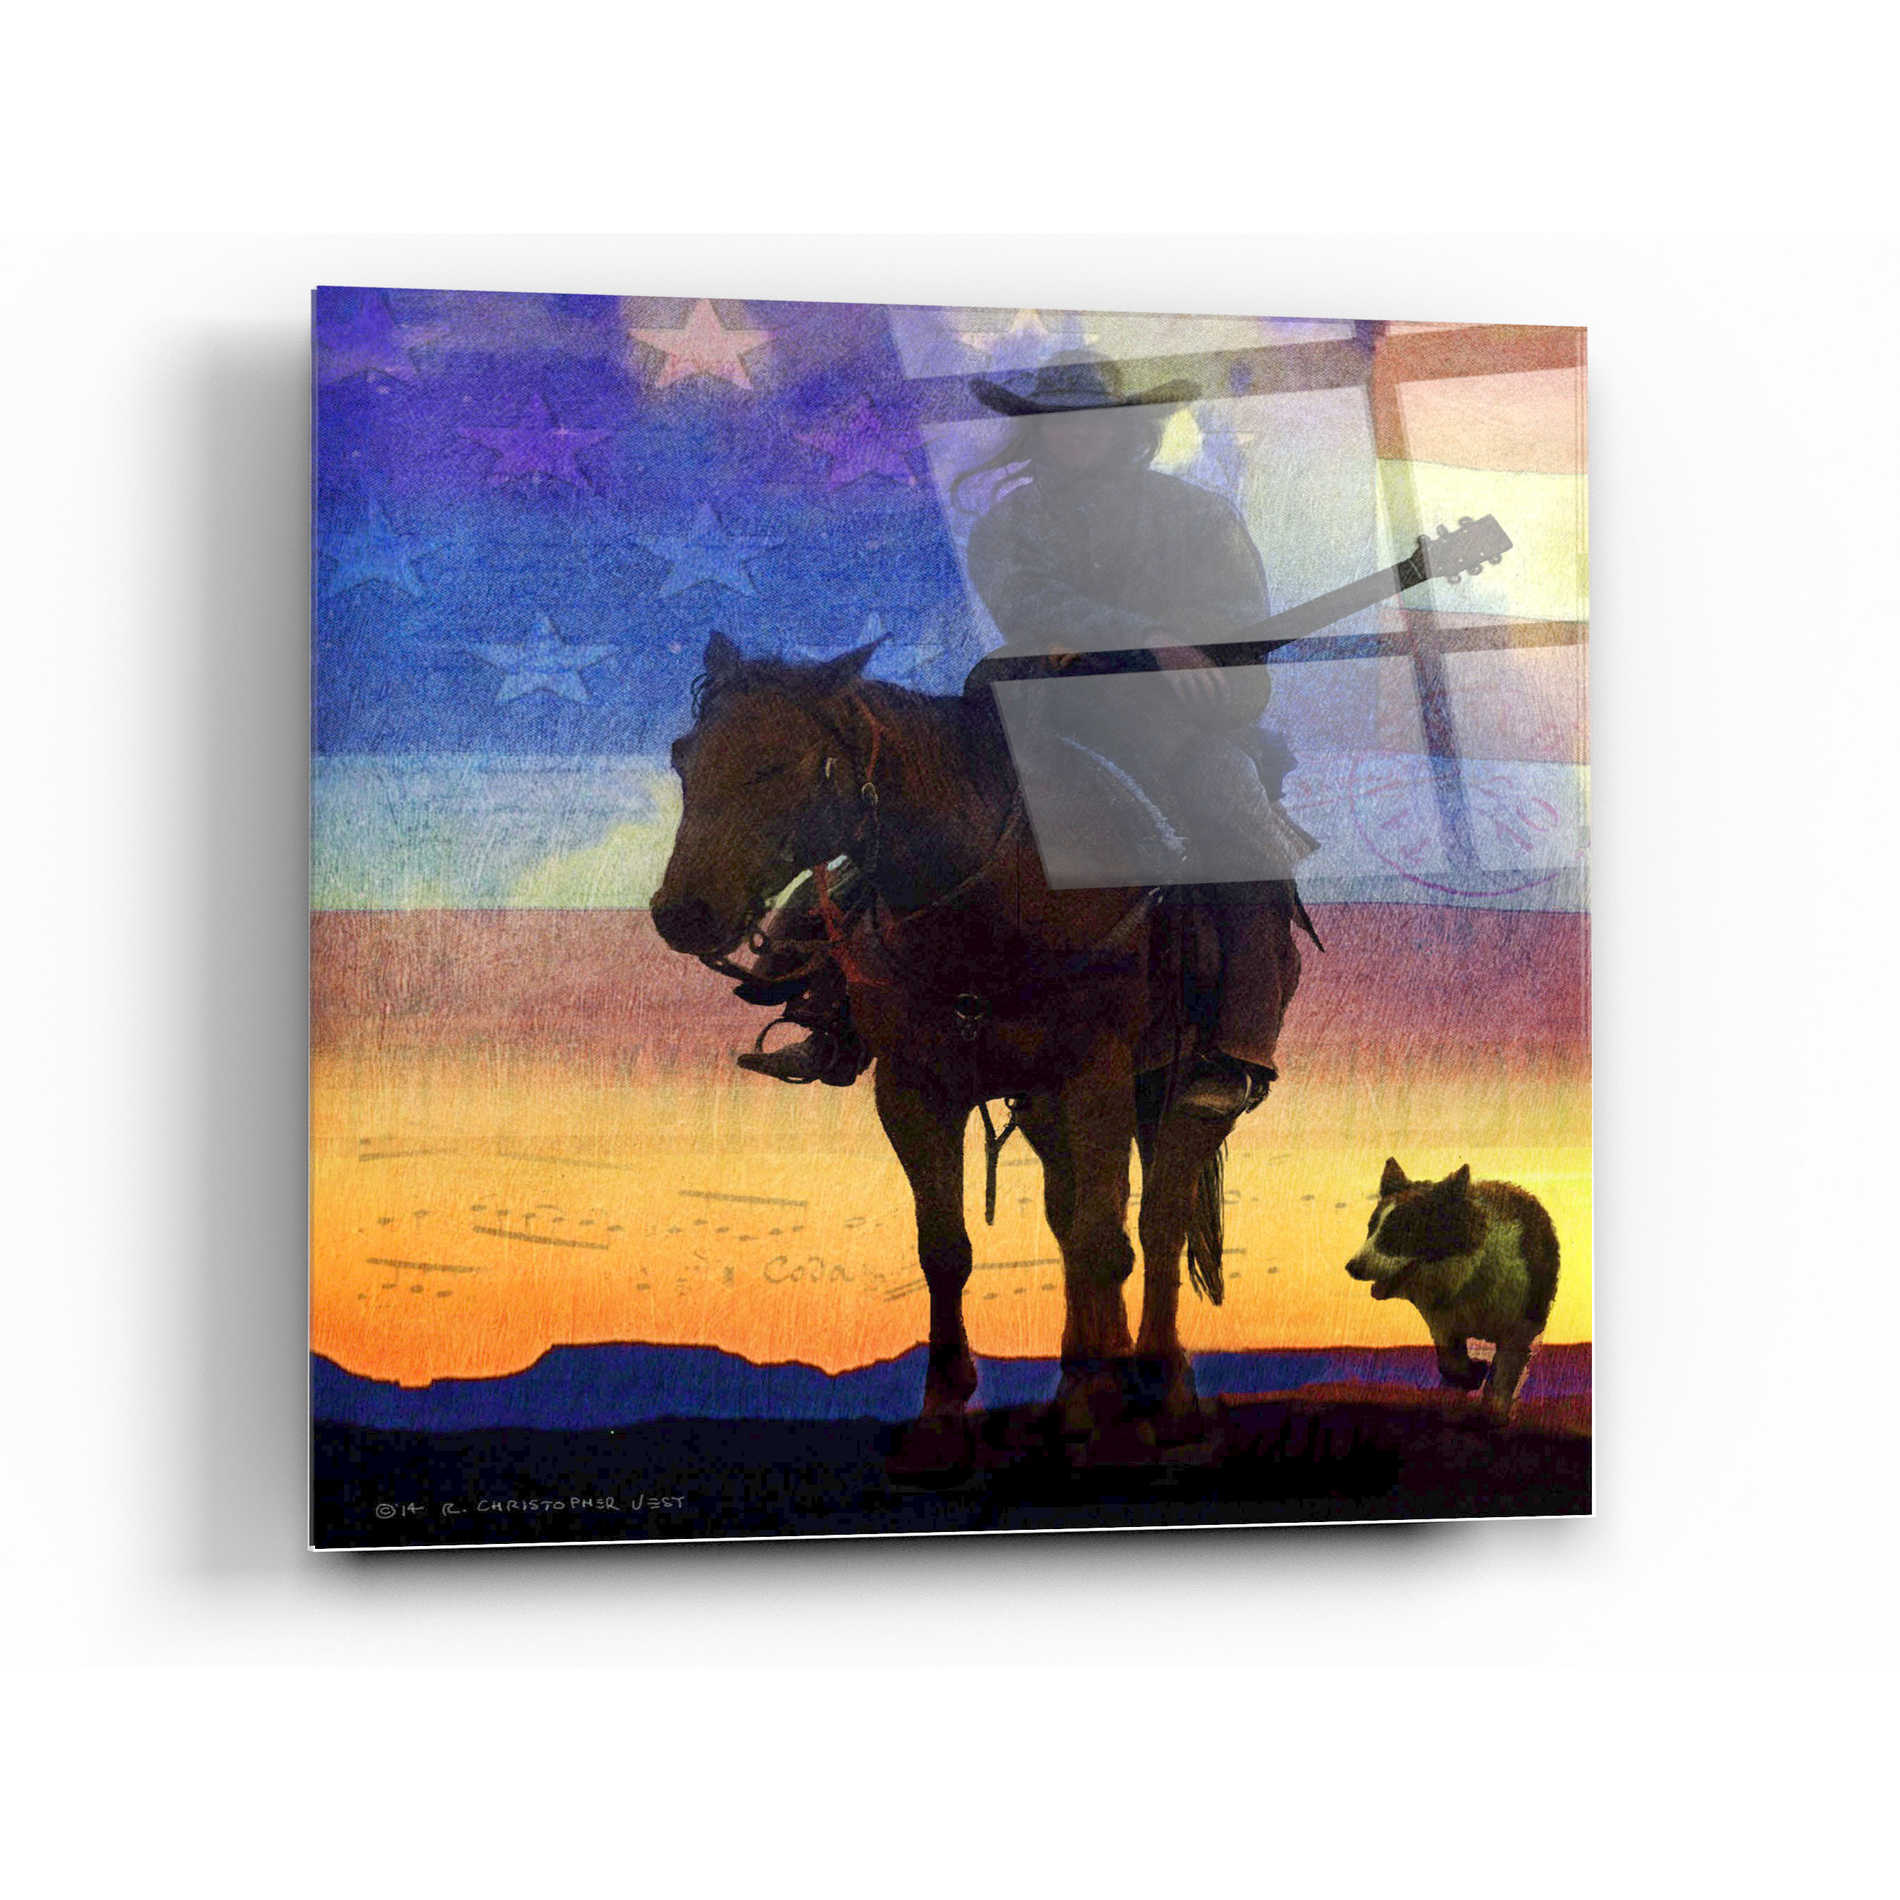 Epic Art 'American Cowgirl' by Chris Vest, Acrylic Glass Wall Art,12x12